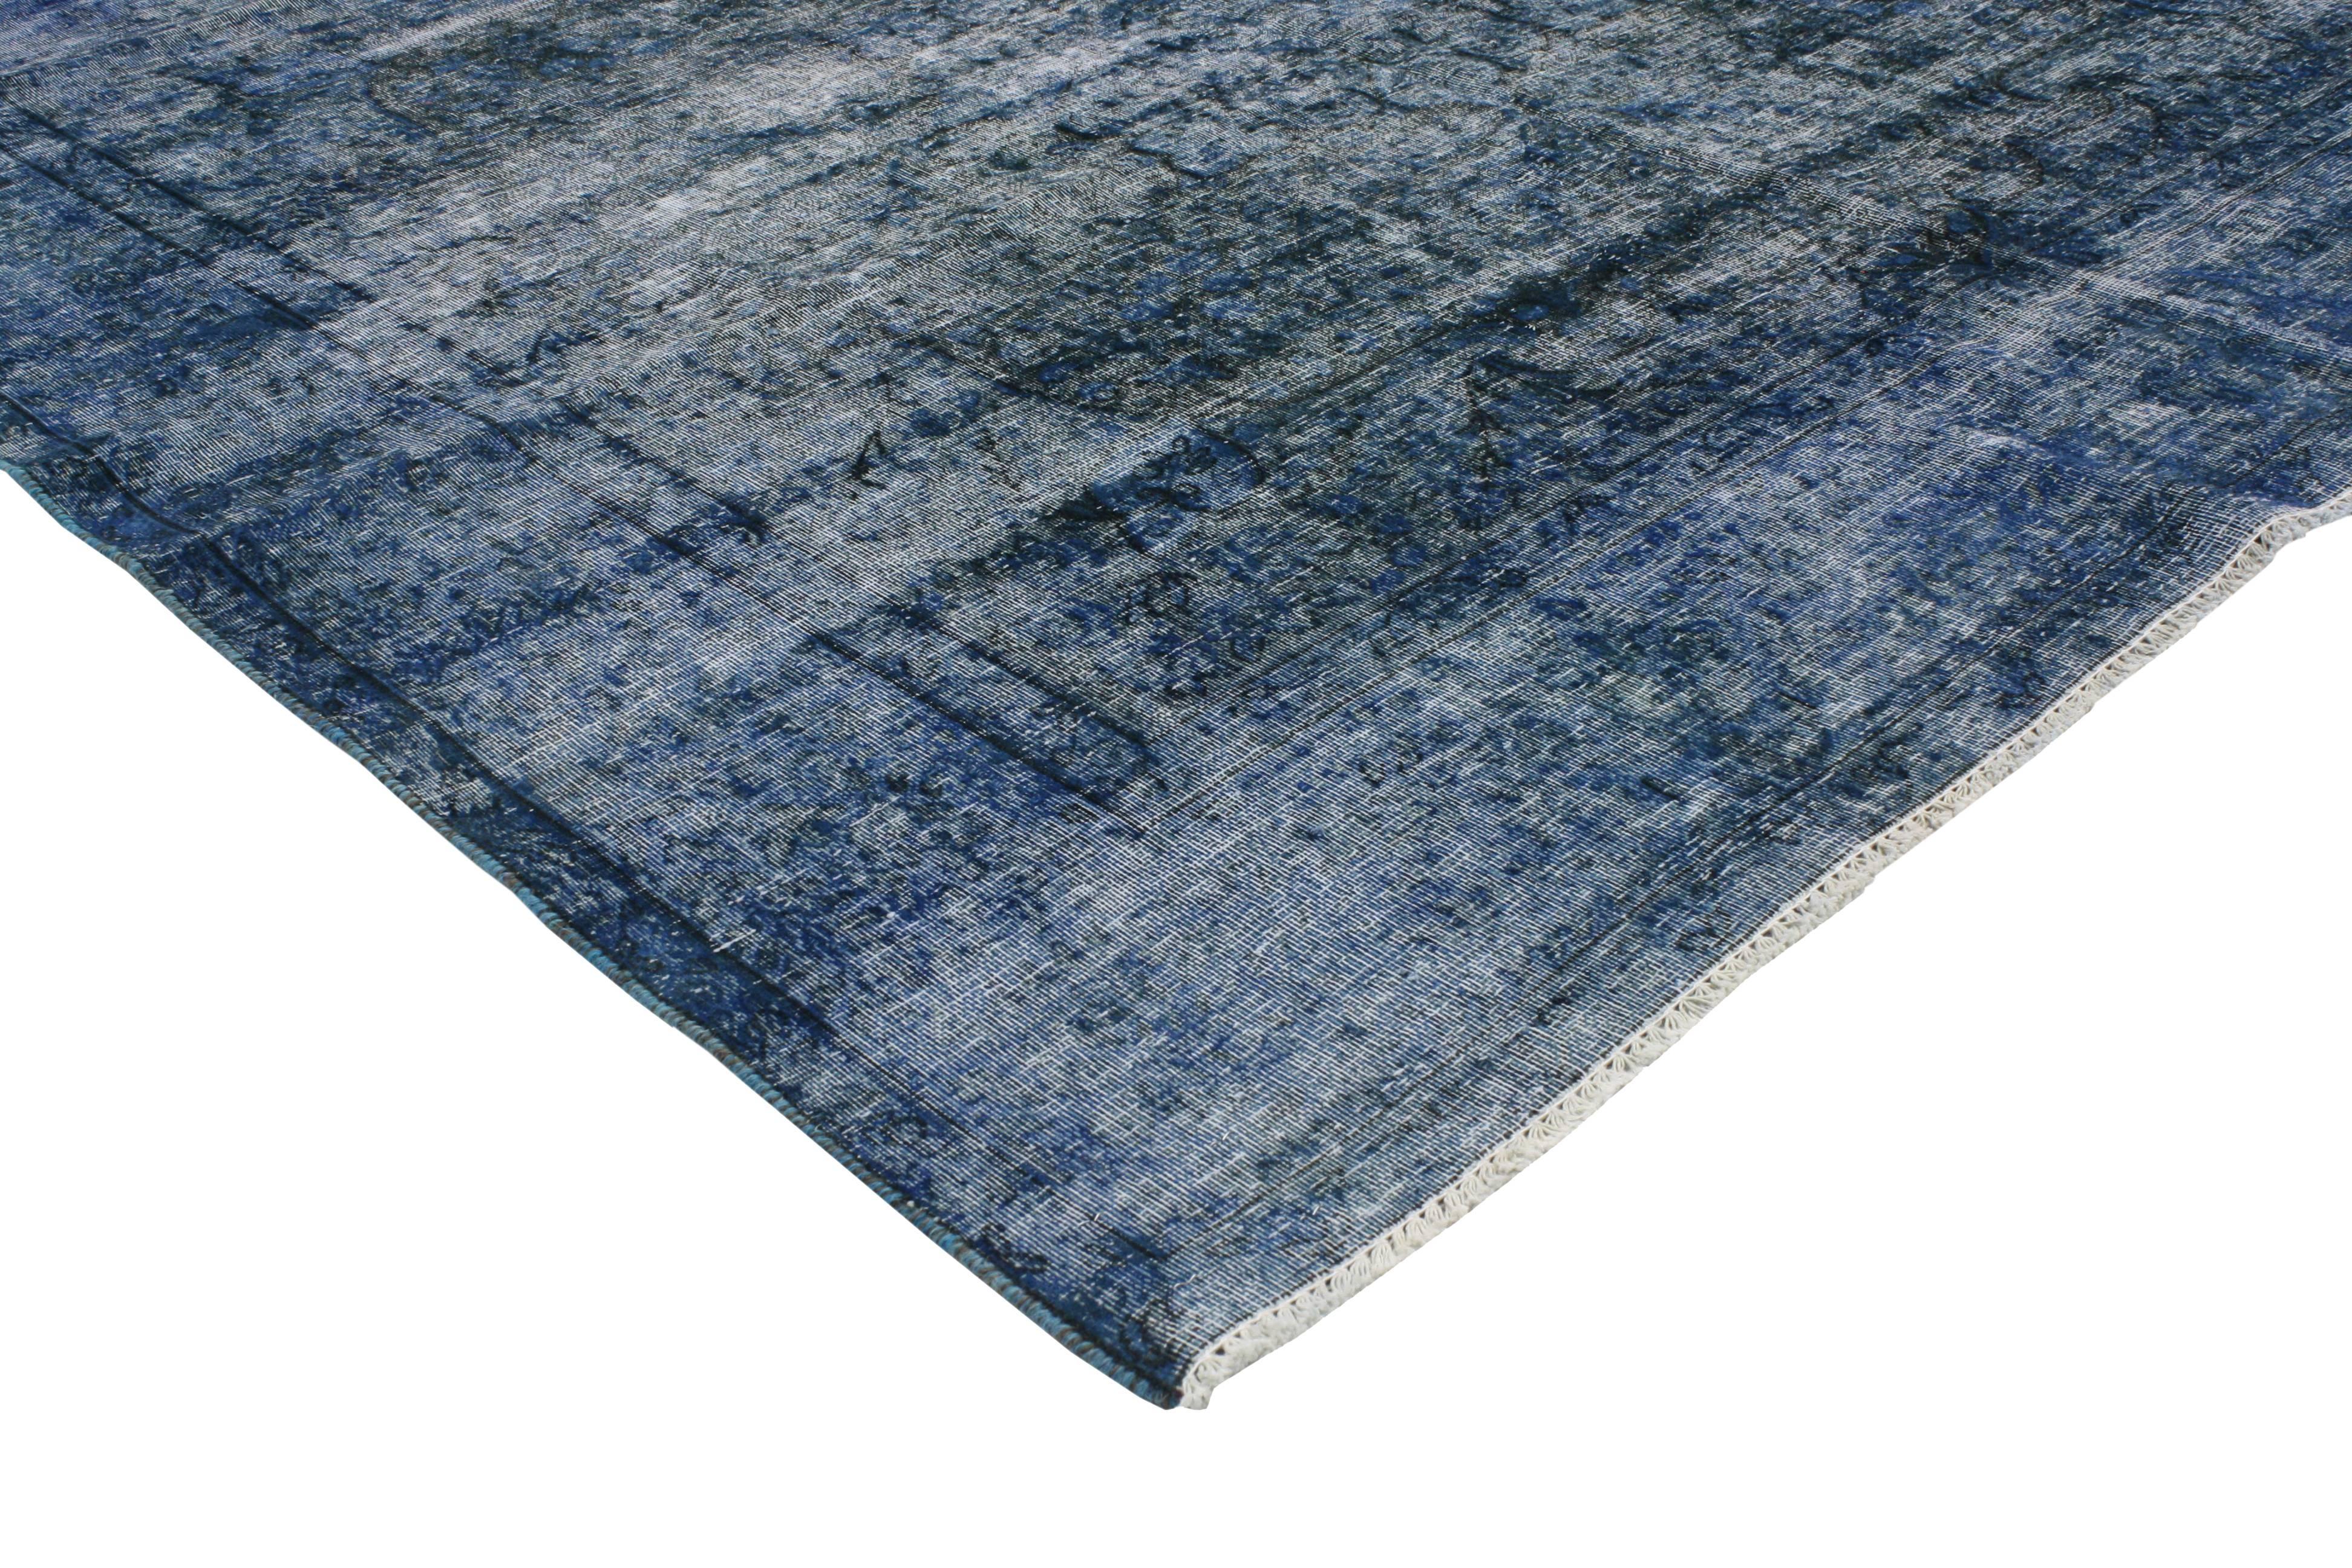 This beautifully distressed and overdyed blue rug features a modern Industrial style. Saturated with variegated shades of blue bring a tranquil yet modern presence when combined with its impeccable and simplistic style. The intricately distressed